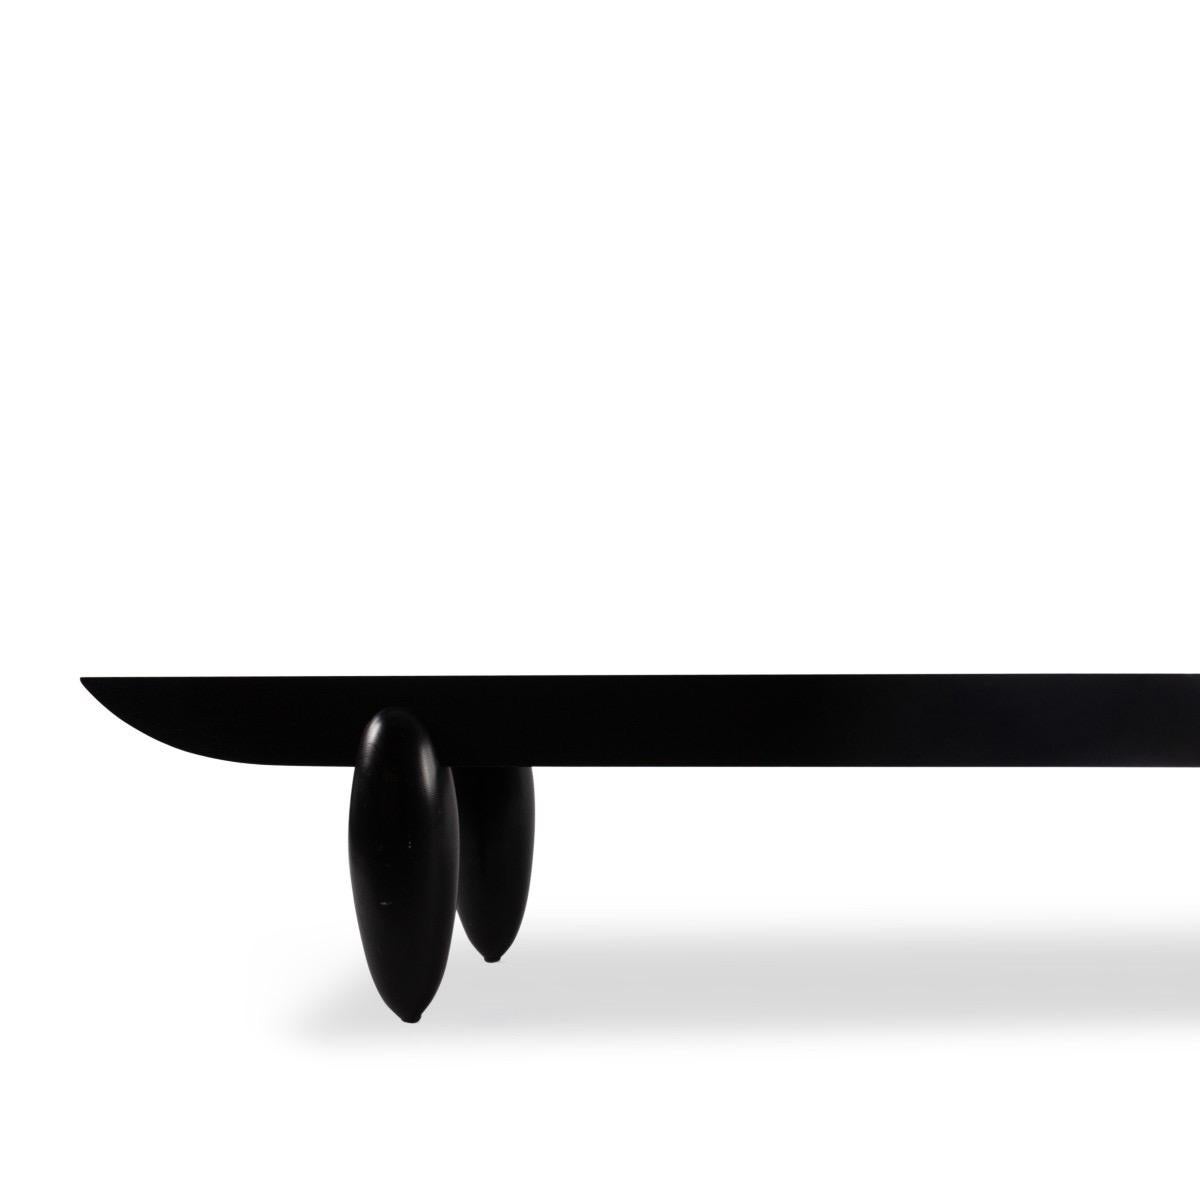 An original Christian Liaigre long bench or low table in ebonized wood.

Dimensions: 72